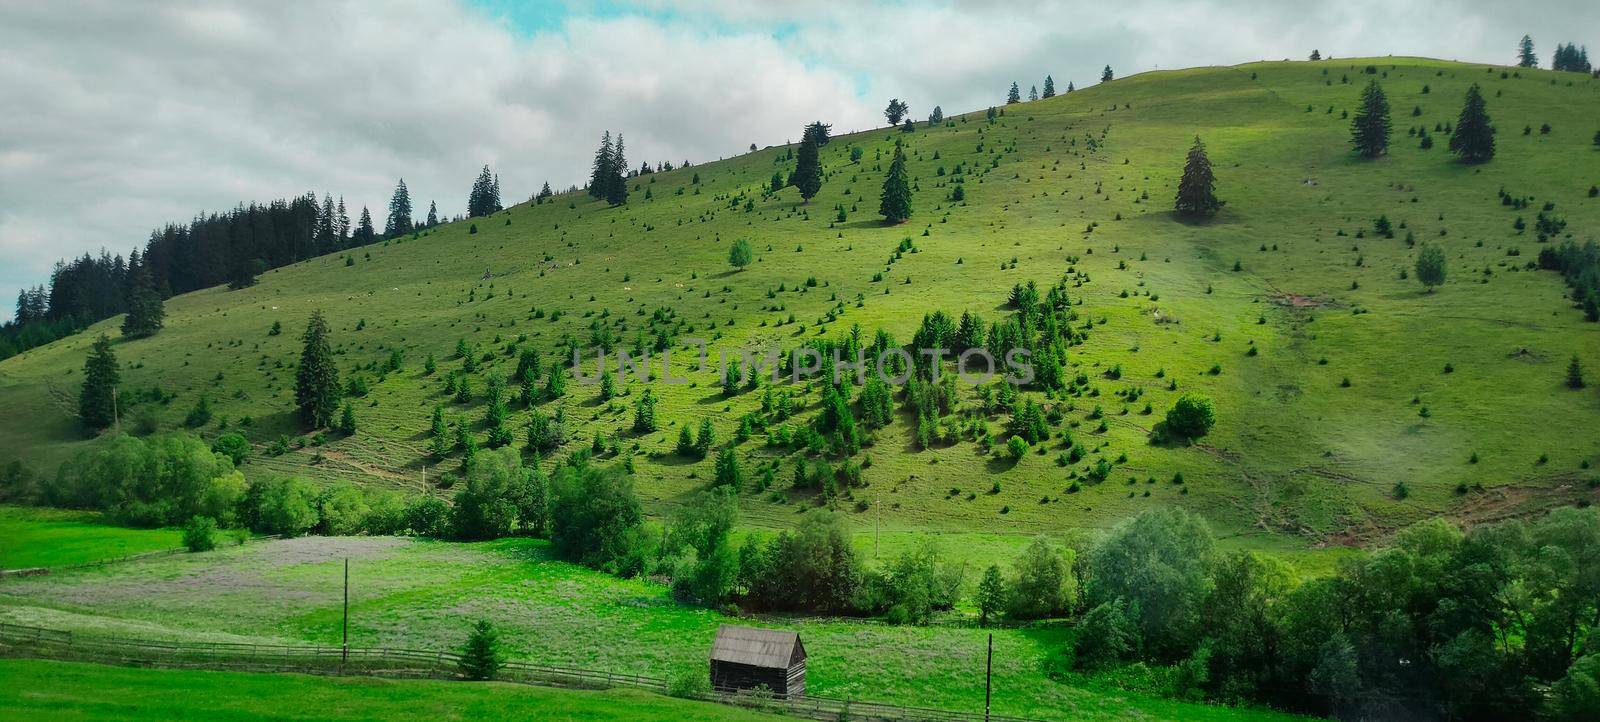 fir trees on meadow between hillsides with conifer forest by banate